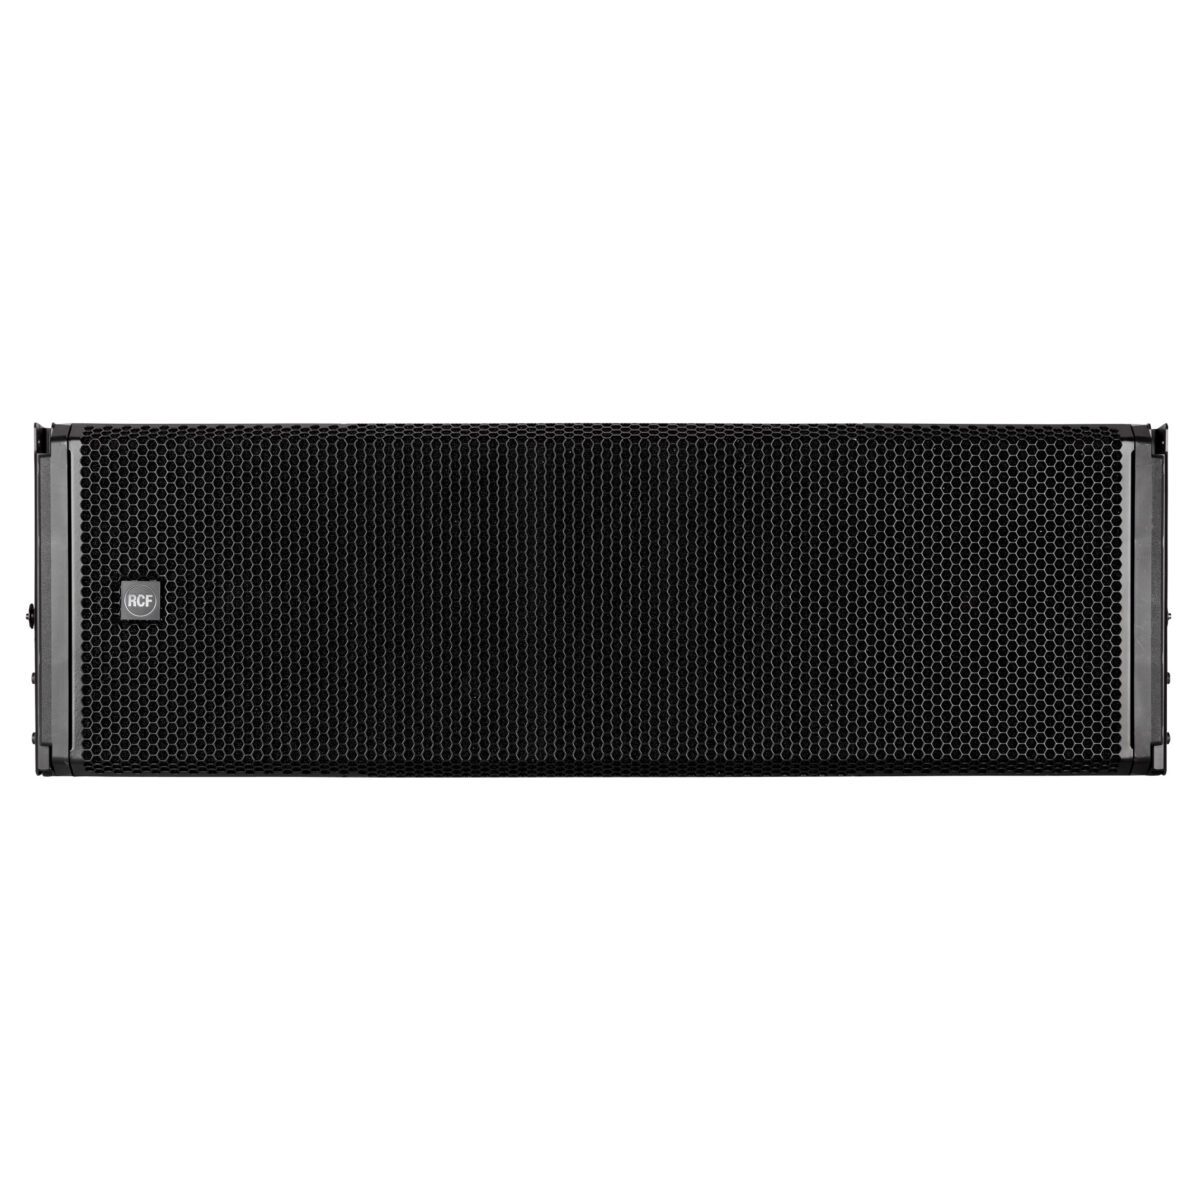 RCF HDL 50-A 4K Active Three-Way Line Array Module